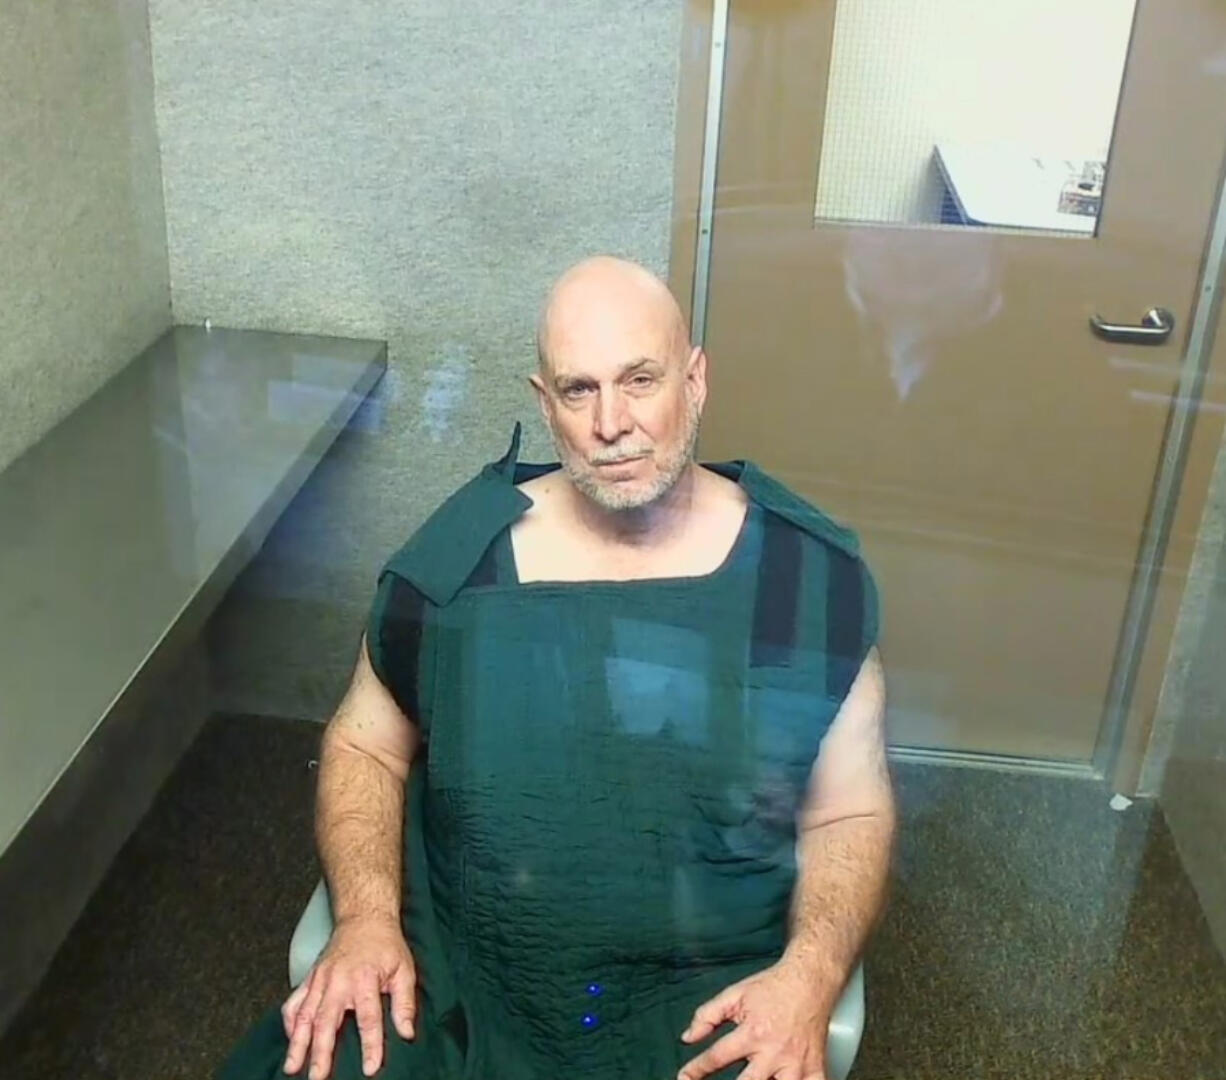 Gregory S. Bailey, 59, appears Friday in Clark County Superior Court on suspicion of vehicular homicide. He's accused of racing and driving drunk in an October crash that killed a Vancouver man.